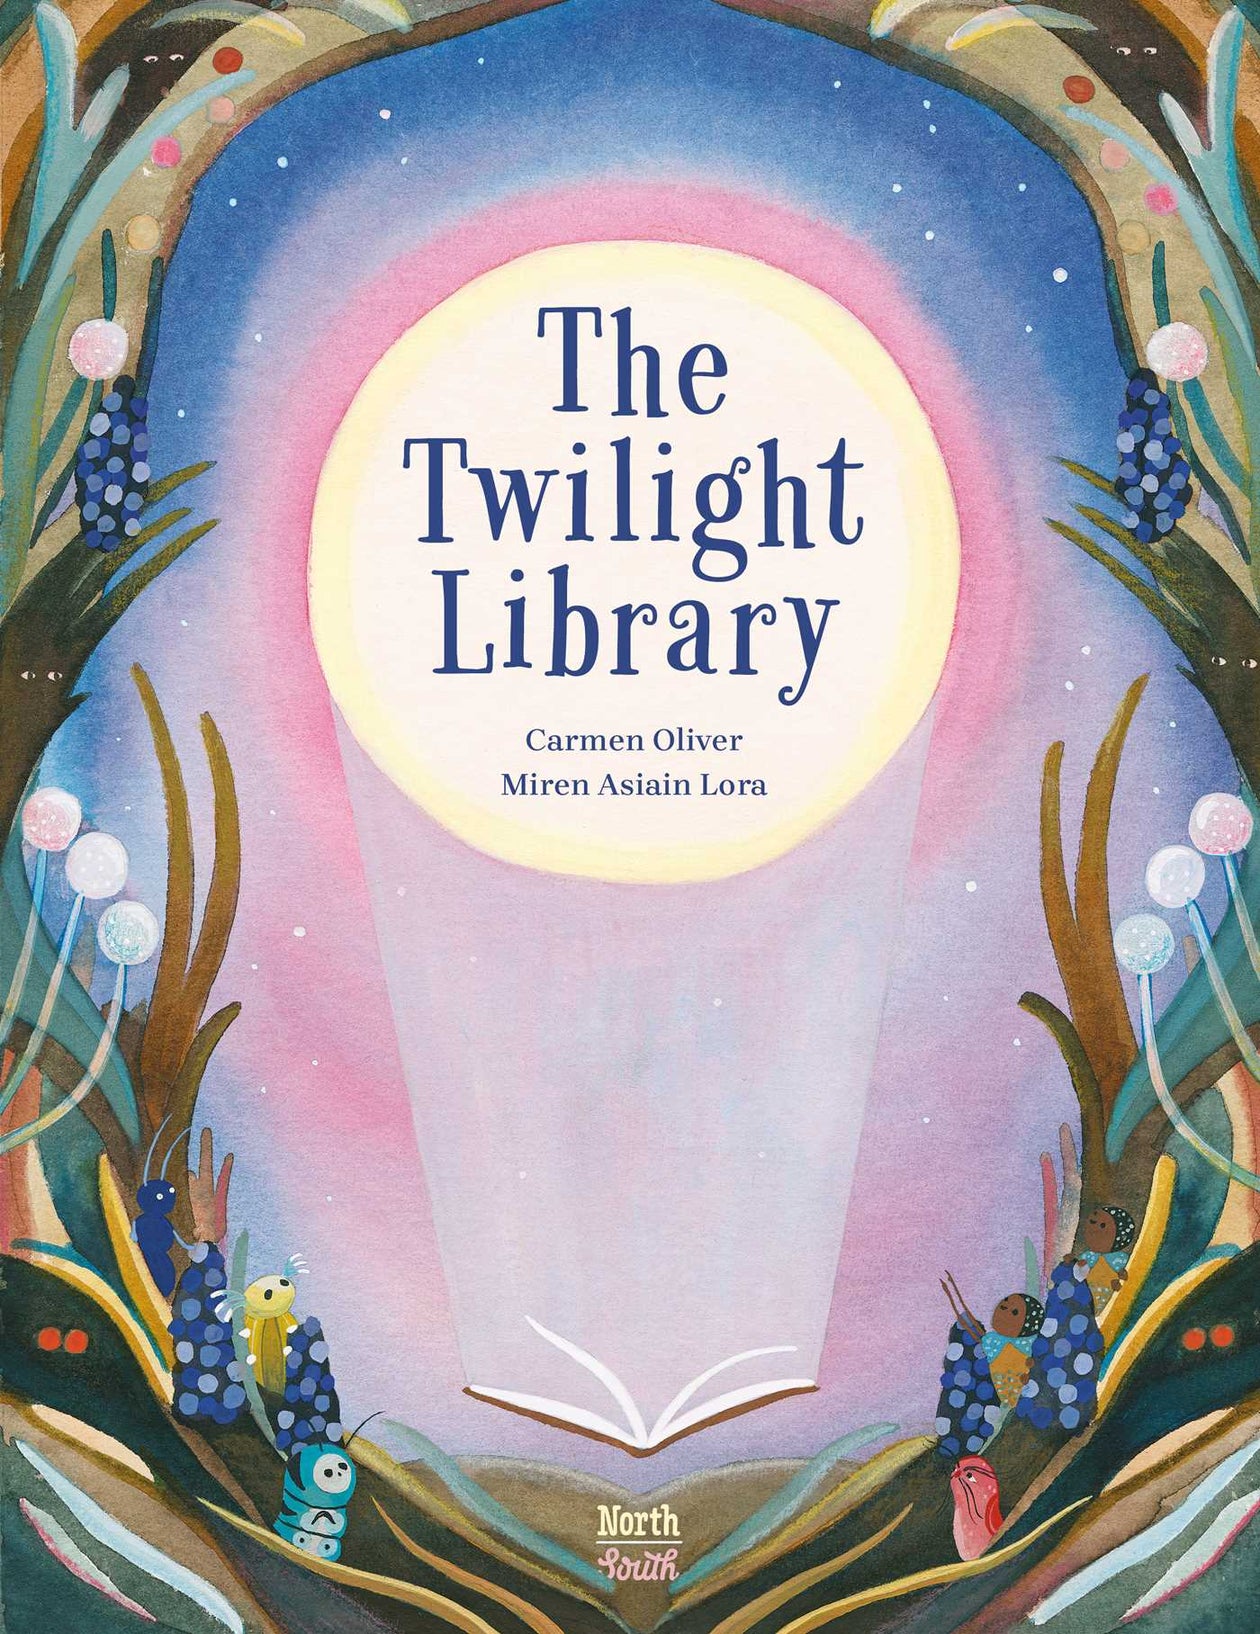 Carmen Oliver: The Twilight Library, illustrated by Miren Asiain Lora